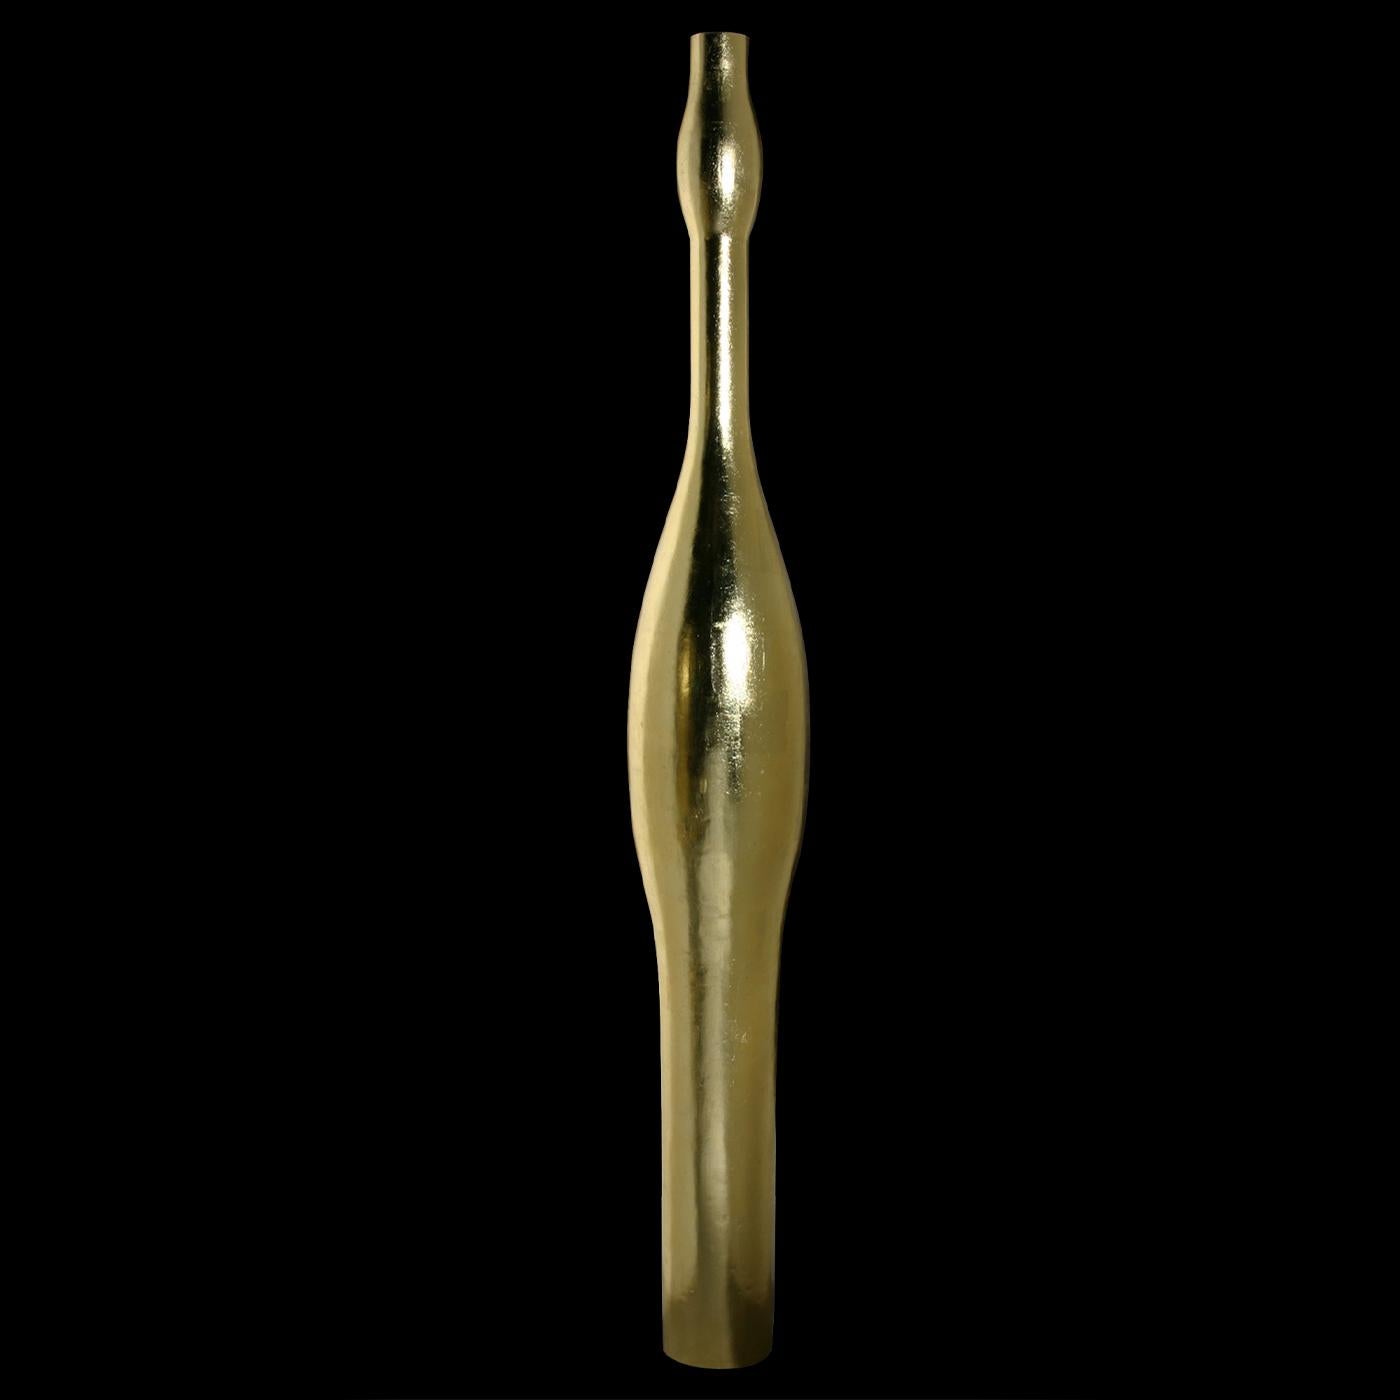 Evoking the shape of a female body, this statement-making vase boasts a tall silhouette (231cm) whose sinuous lines are enhanced by prized gold leaf. A collector's piece made entirely of resin, this vase will bring interest and shimmering elegance